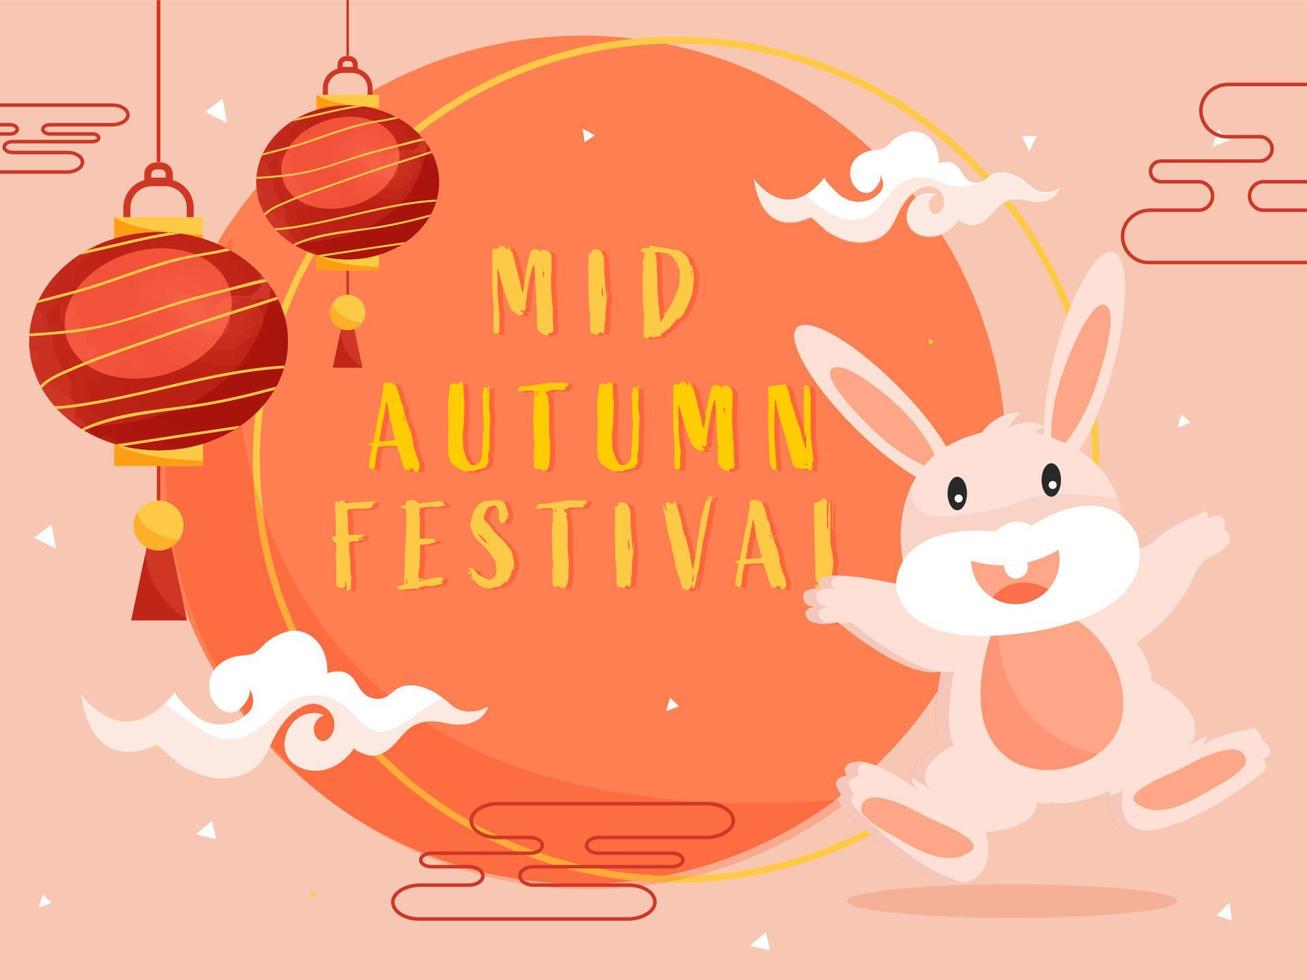 Mid Autumn Festival Poster Design with Cartoon Bunny Dancing, Clouds and Hanging Chinese Lanterns Decorated on Peach Background. vector